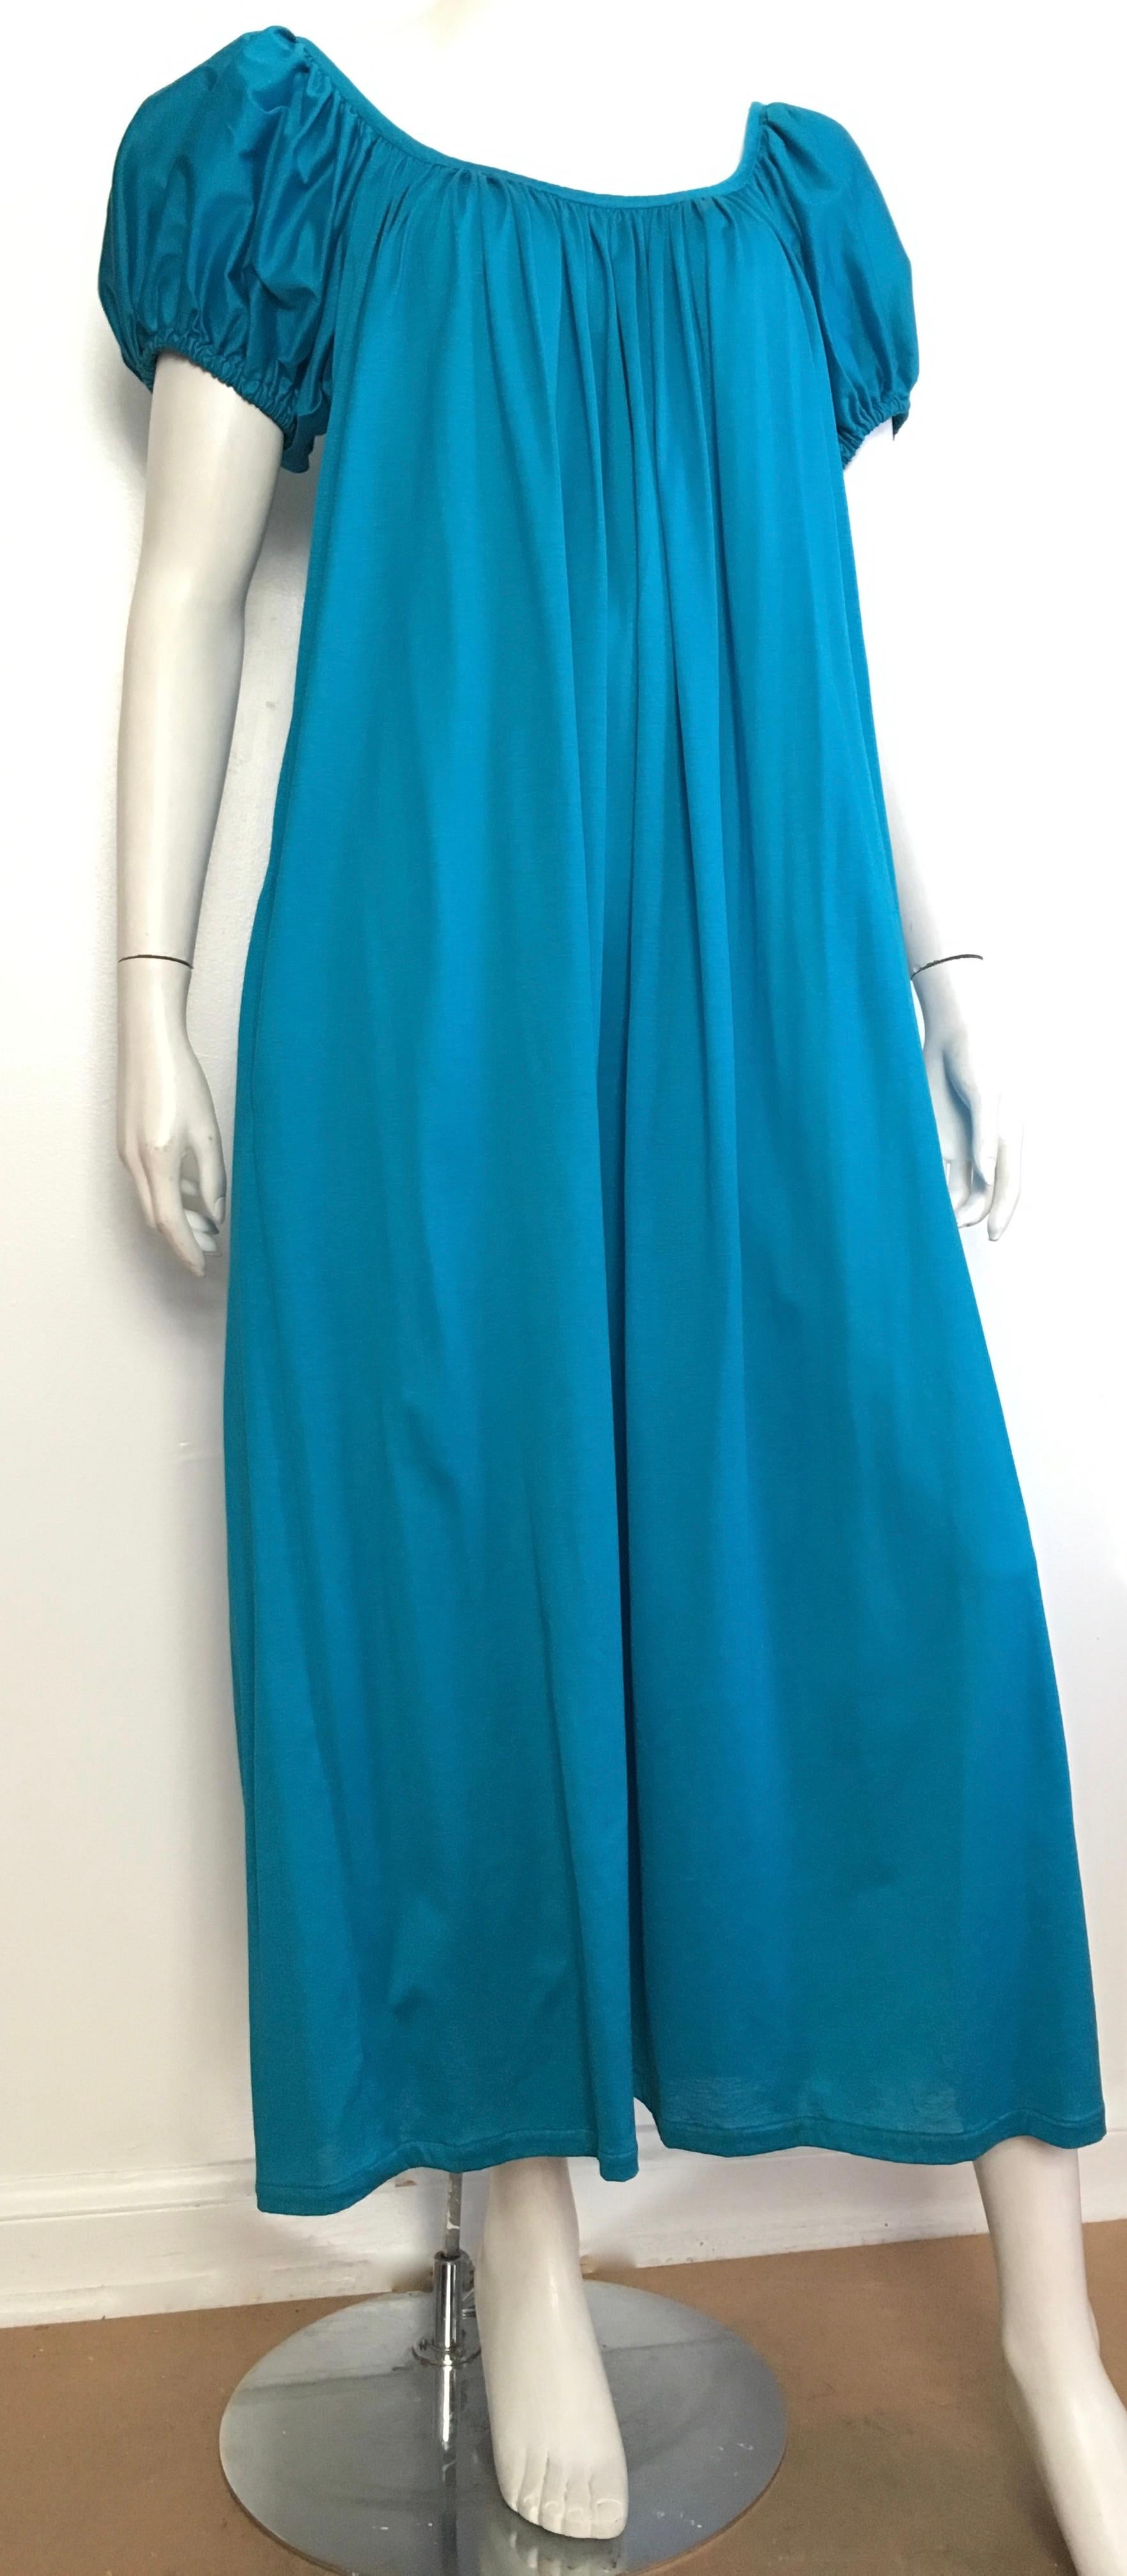 Kenzo Paris cotton maxi blue dress with pockets is a French size 40 and fits a 8.  Made in France.
Belt this dress, as shown in photo, and I think a size 6 could wear this dress but you be the judge.  Perfect dress for walking on the beaches in